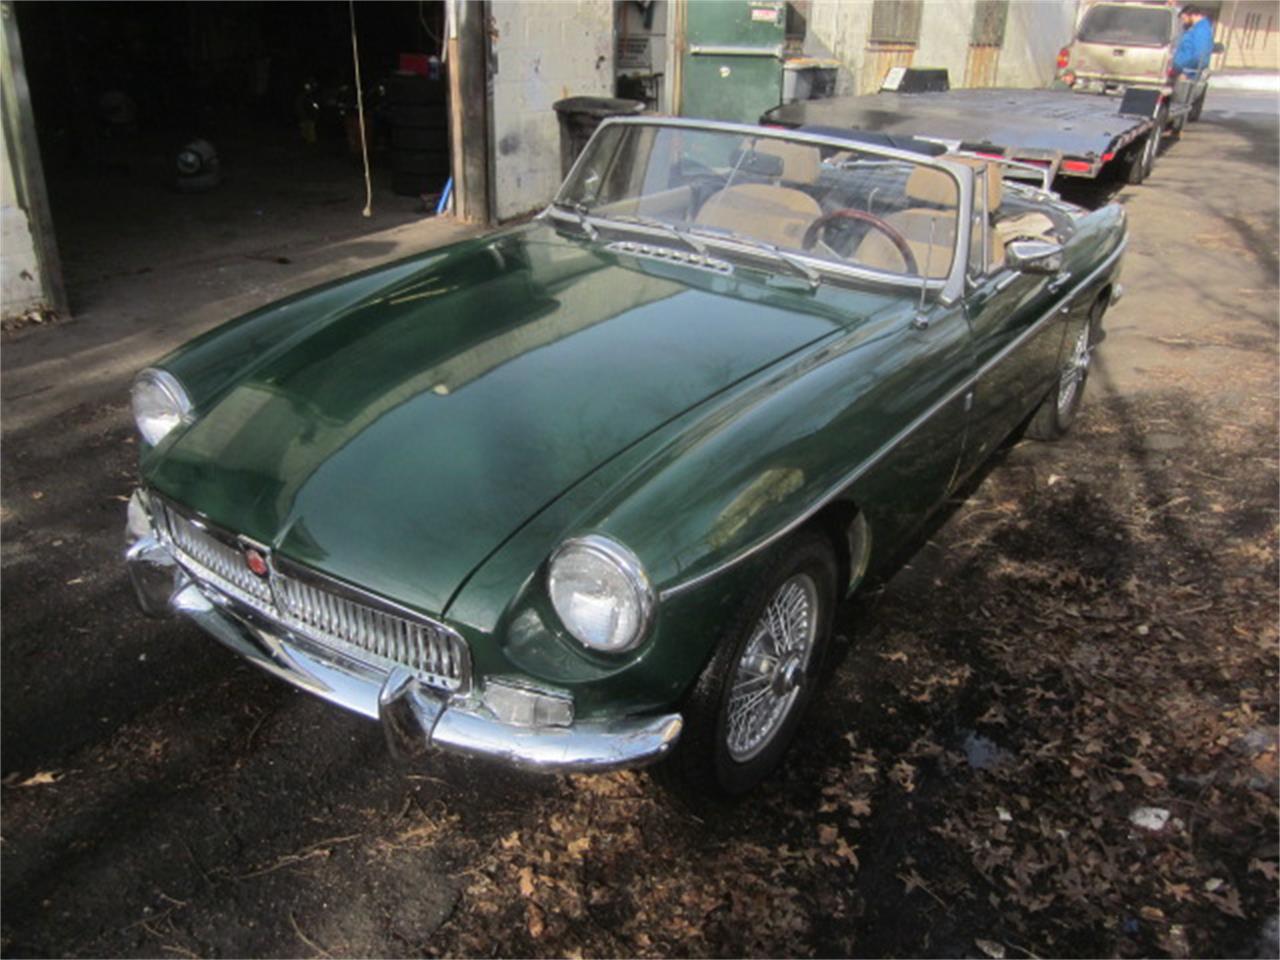 1979 MG MGB for sale in Stratford, CT